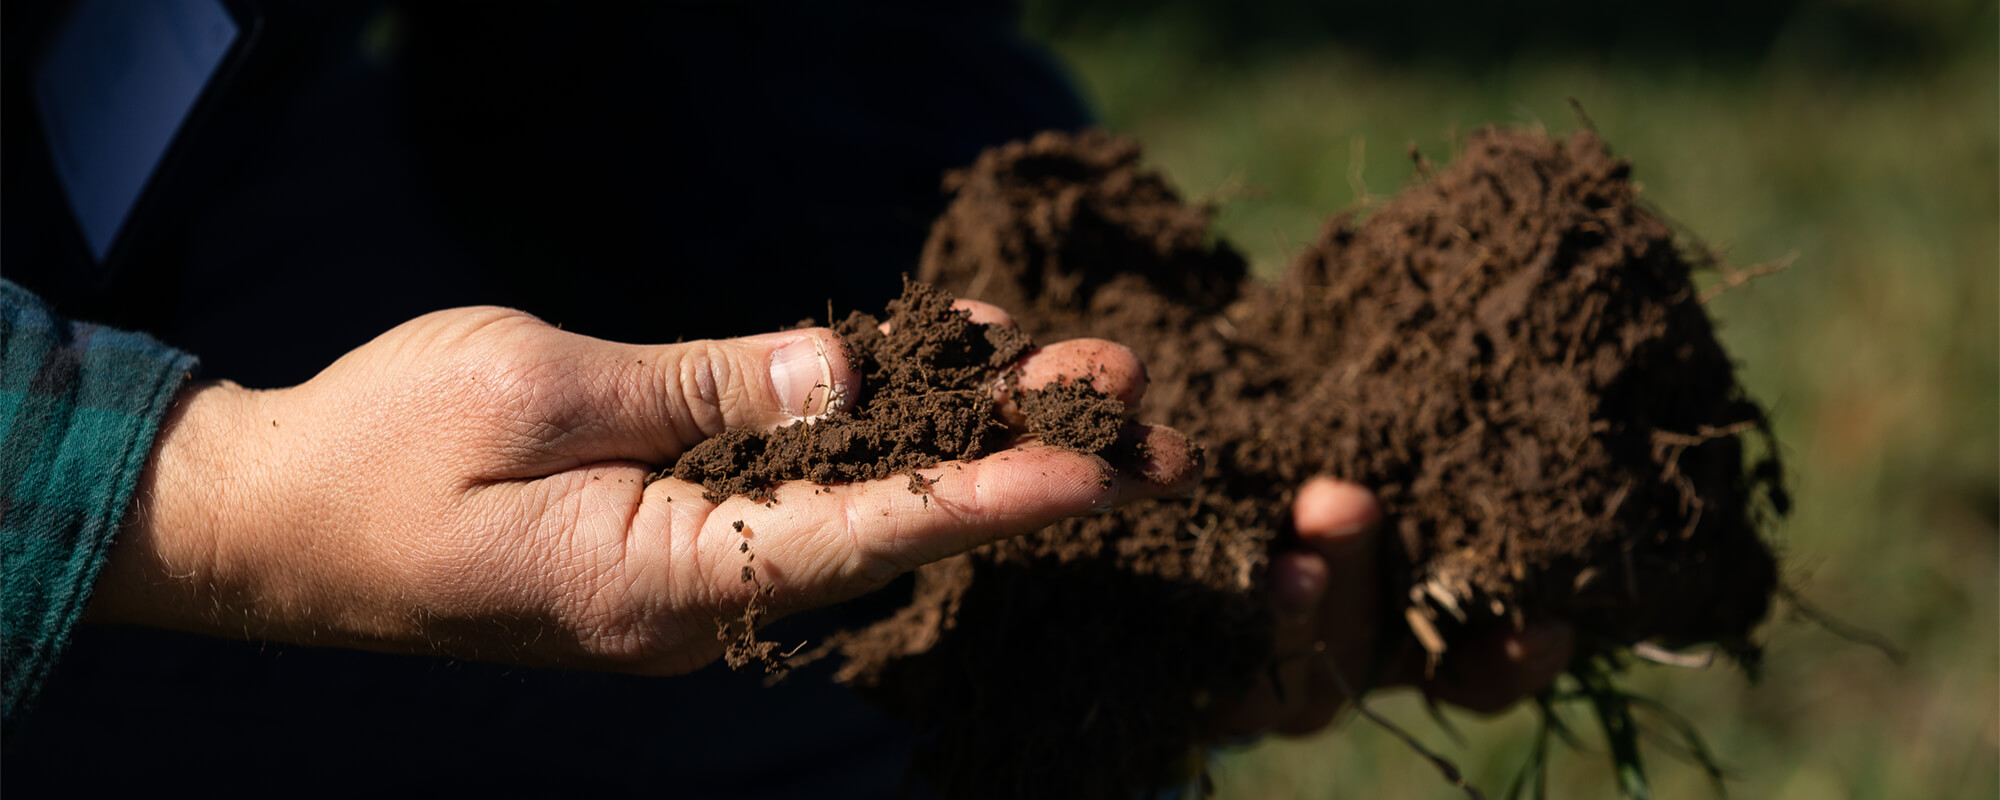 It's All Game: Time to soil your plants again